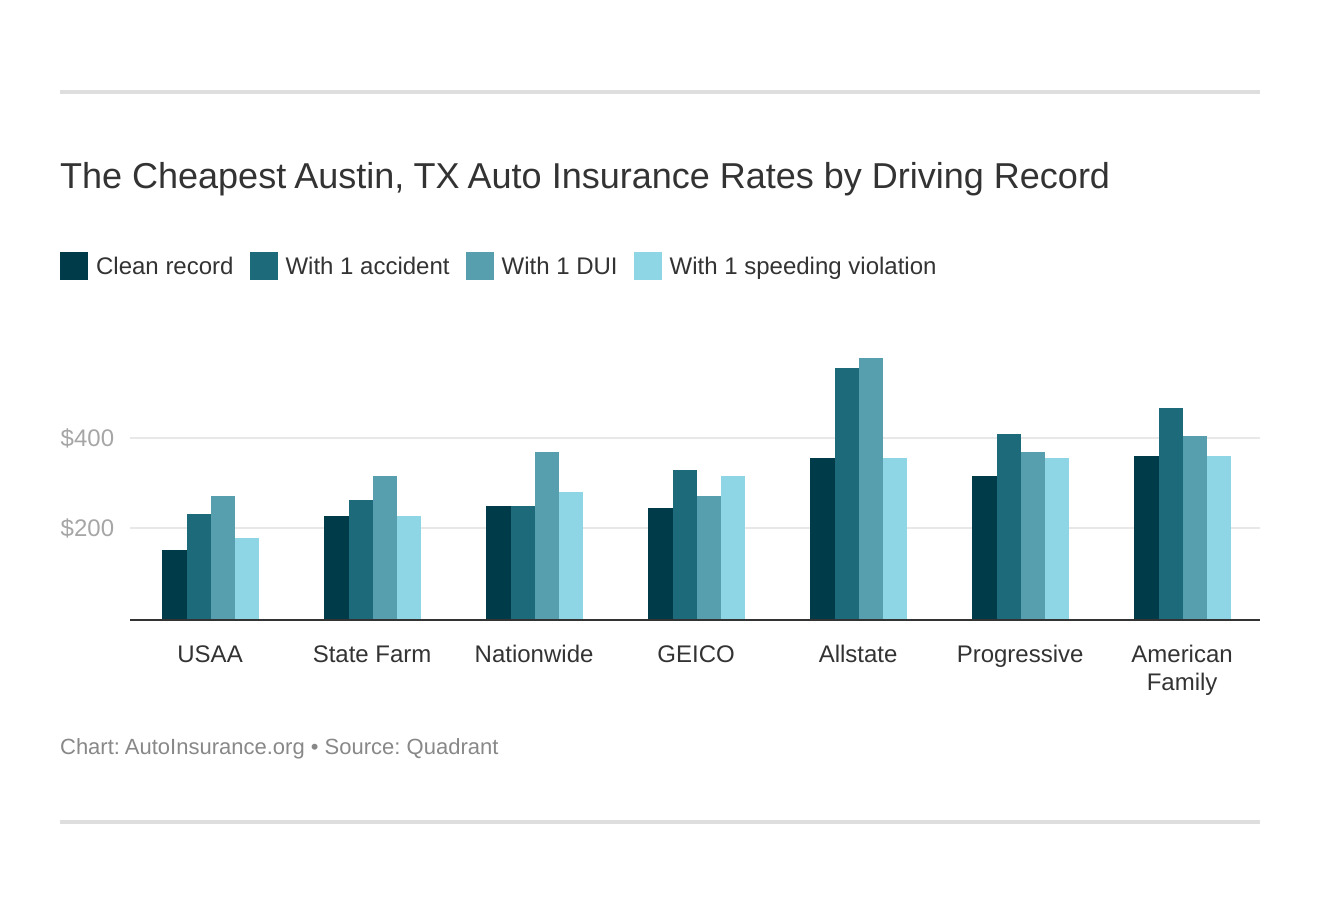 The Cheapest Austin, TX Auto Insurance Rates by Driving Record